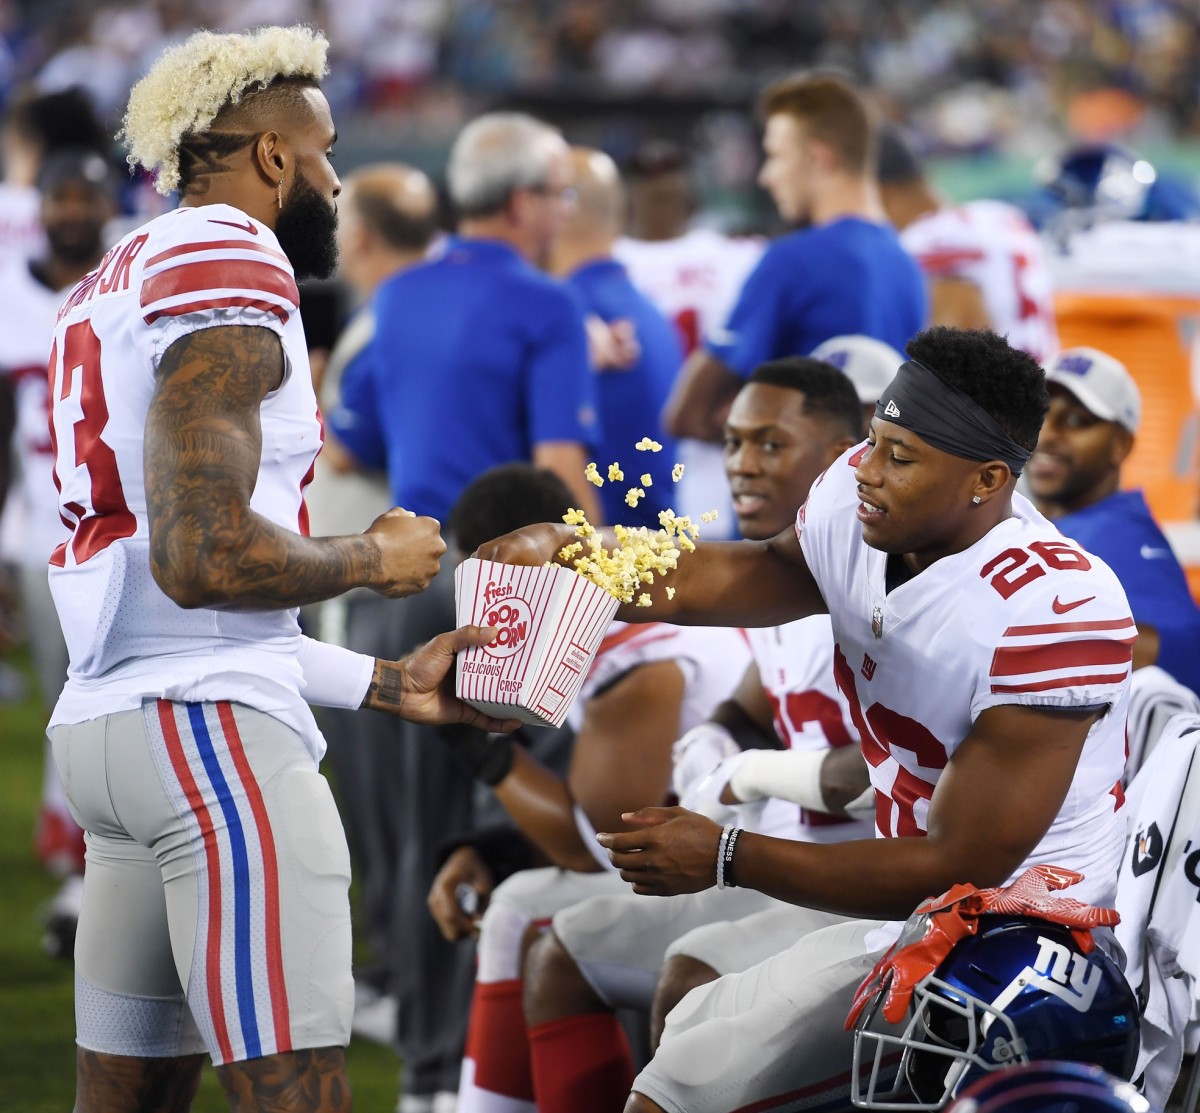 Giants vs. Jets preseason game at MetLife Stadium in East Rutherford on Friday, August 24, 2018. G #13 Odell Beckham Jr. and #26 Saquon Barkley eat popcorn in the fourth quarter.